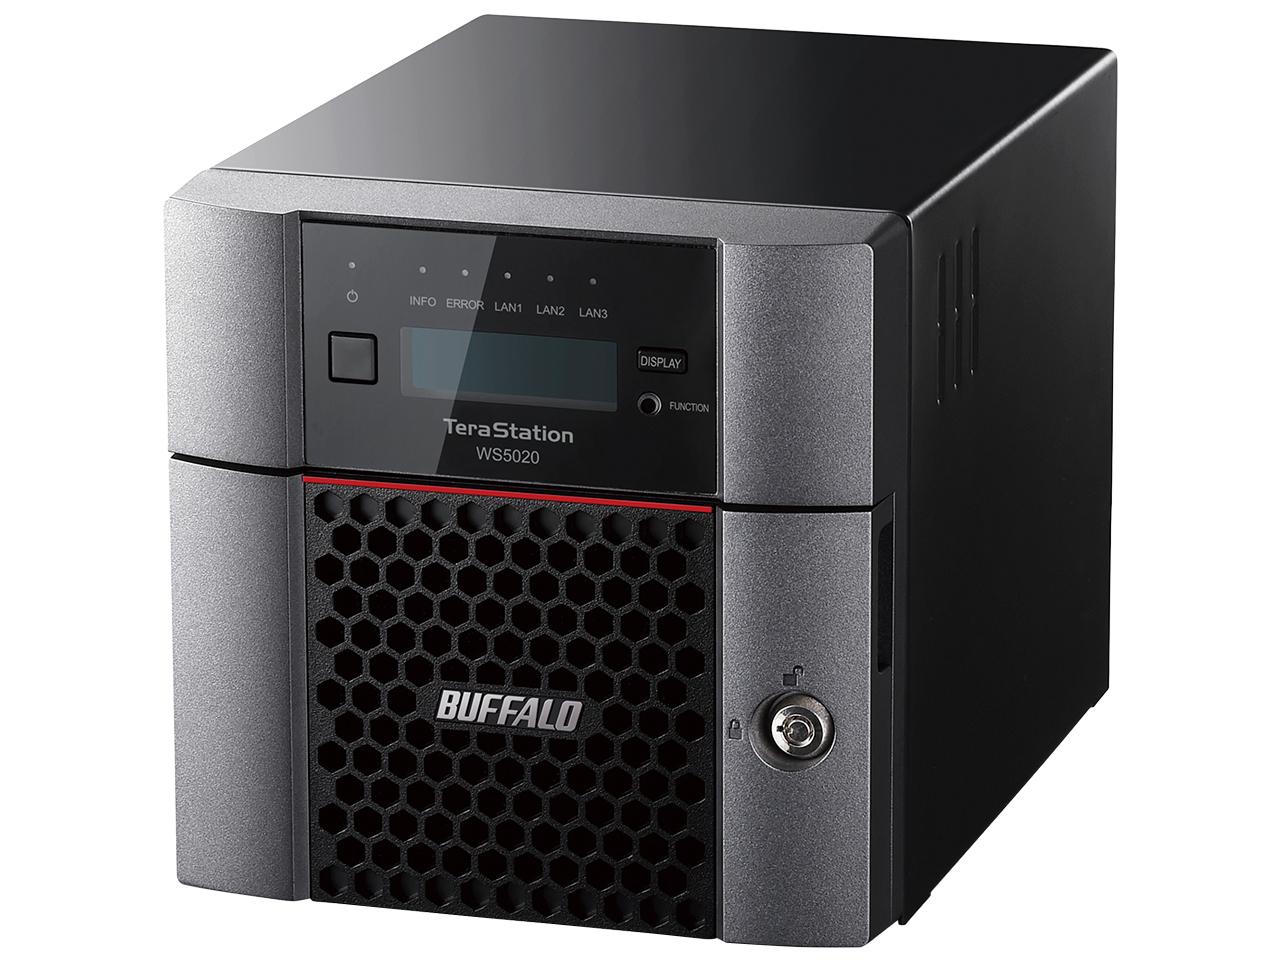 Windows@Server@IoT@2019@for@Storage@Workgroup@Editionځ@2xCfXNgbvNAS@4TB  WS5220DN04W9 1 BUFFALO obt@[